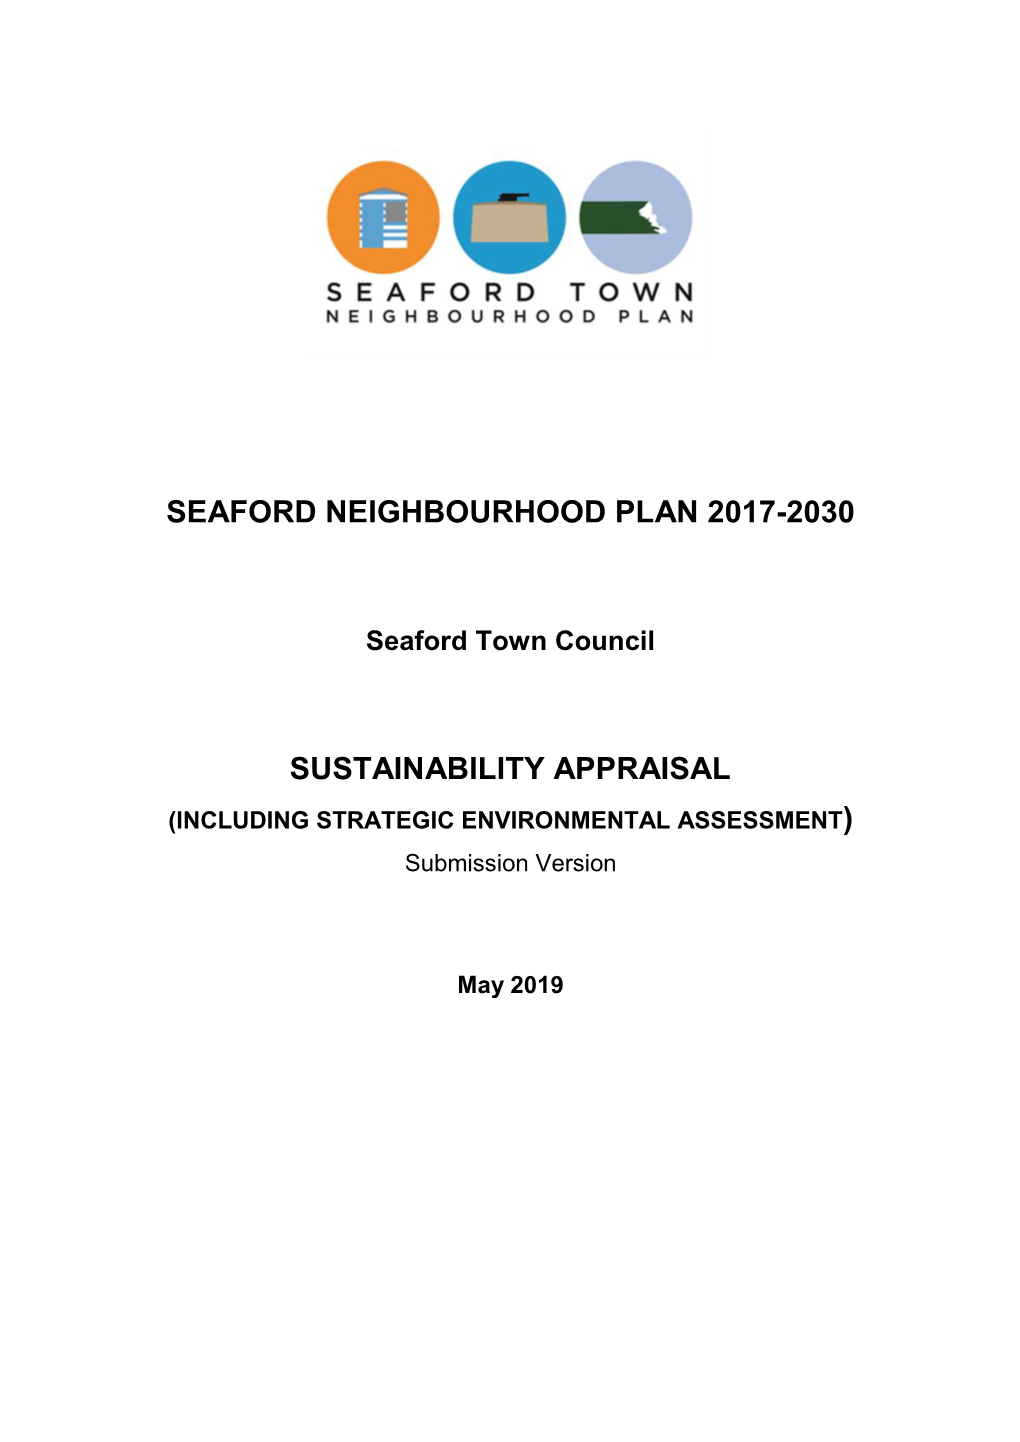 SUSTAINABILITY APPRAISAL (INCLUDING STRATEGIC ENVIRONMENTAL ASSESSMENT) Submission Version